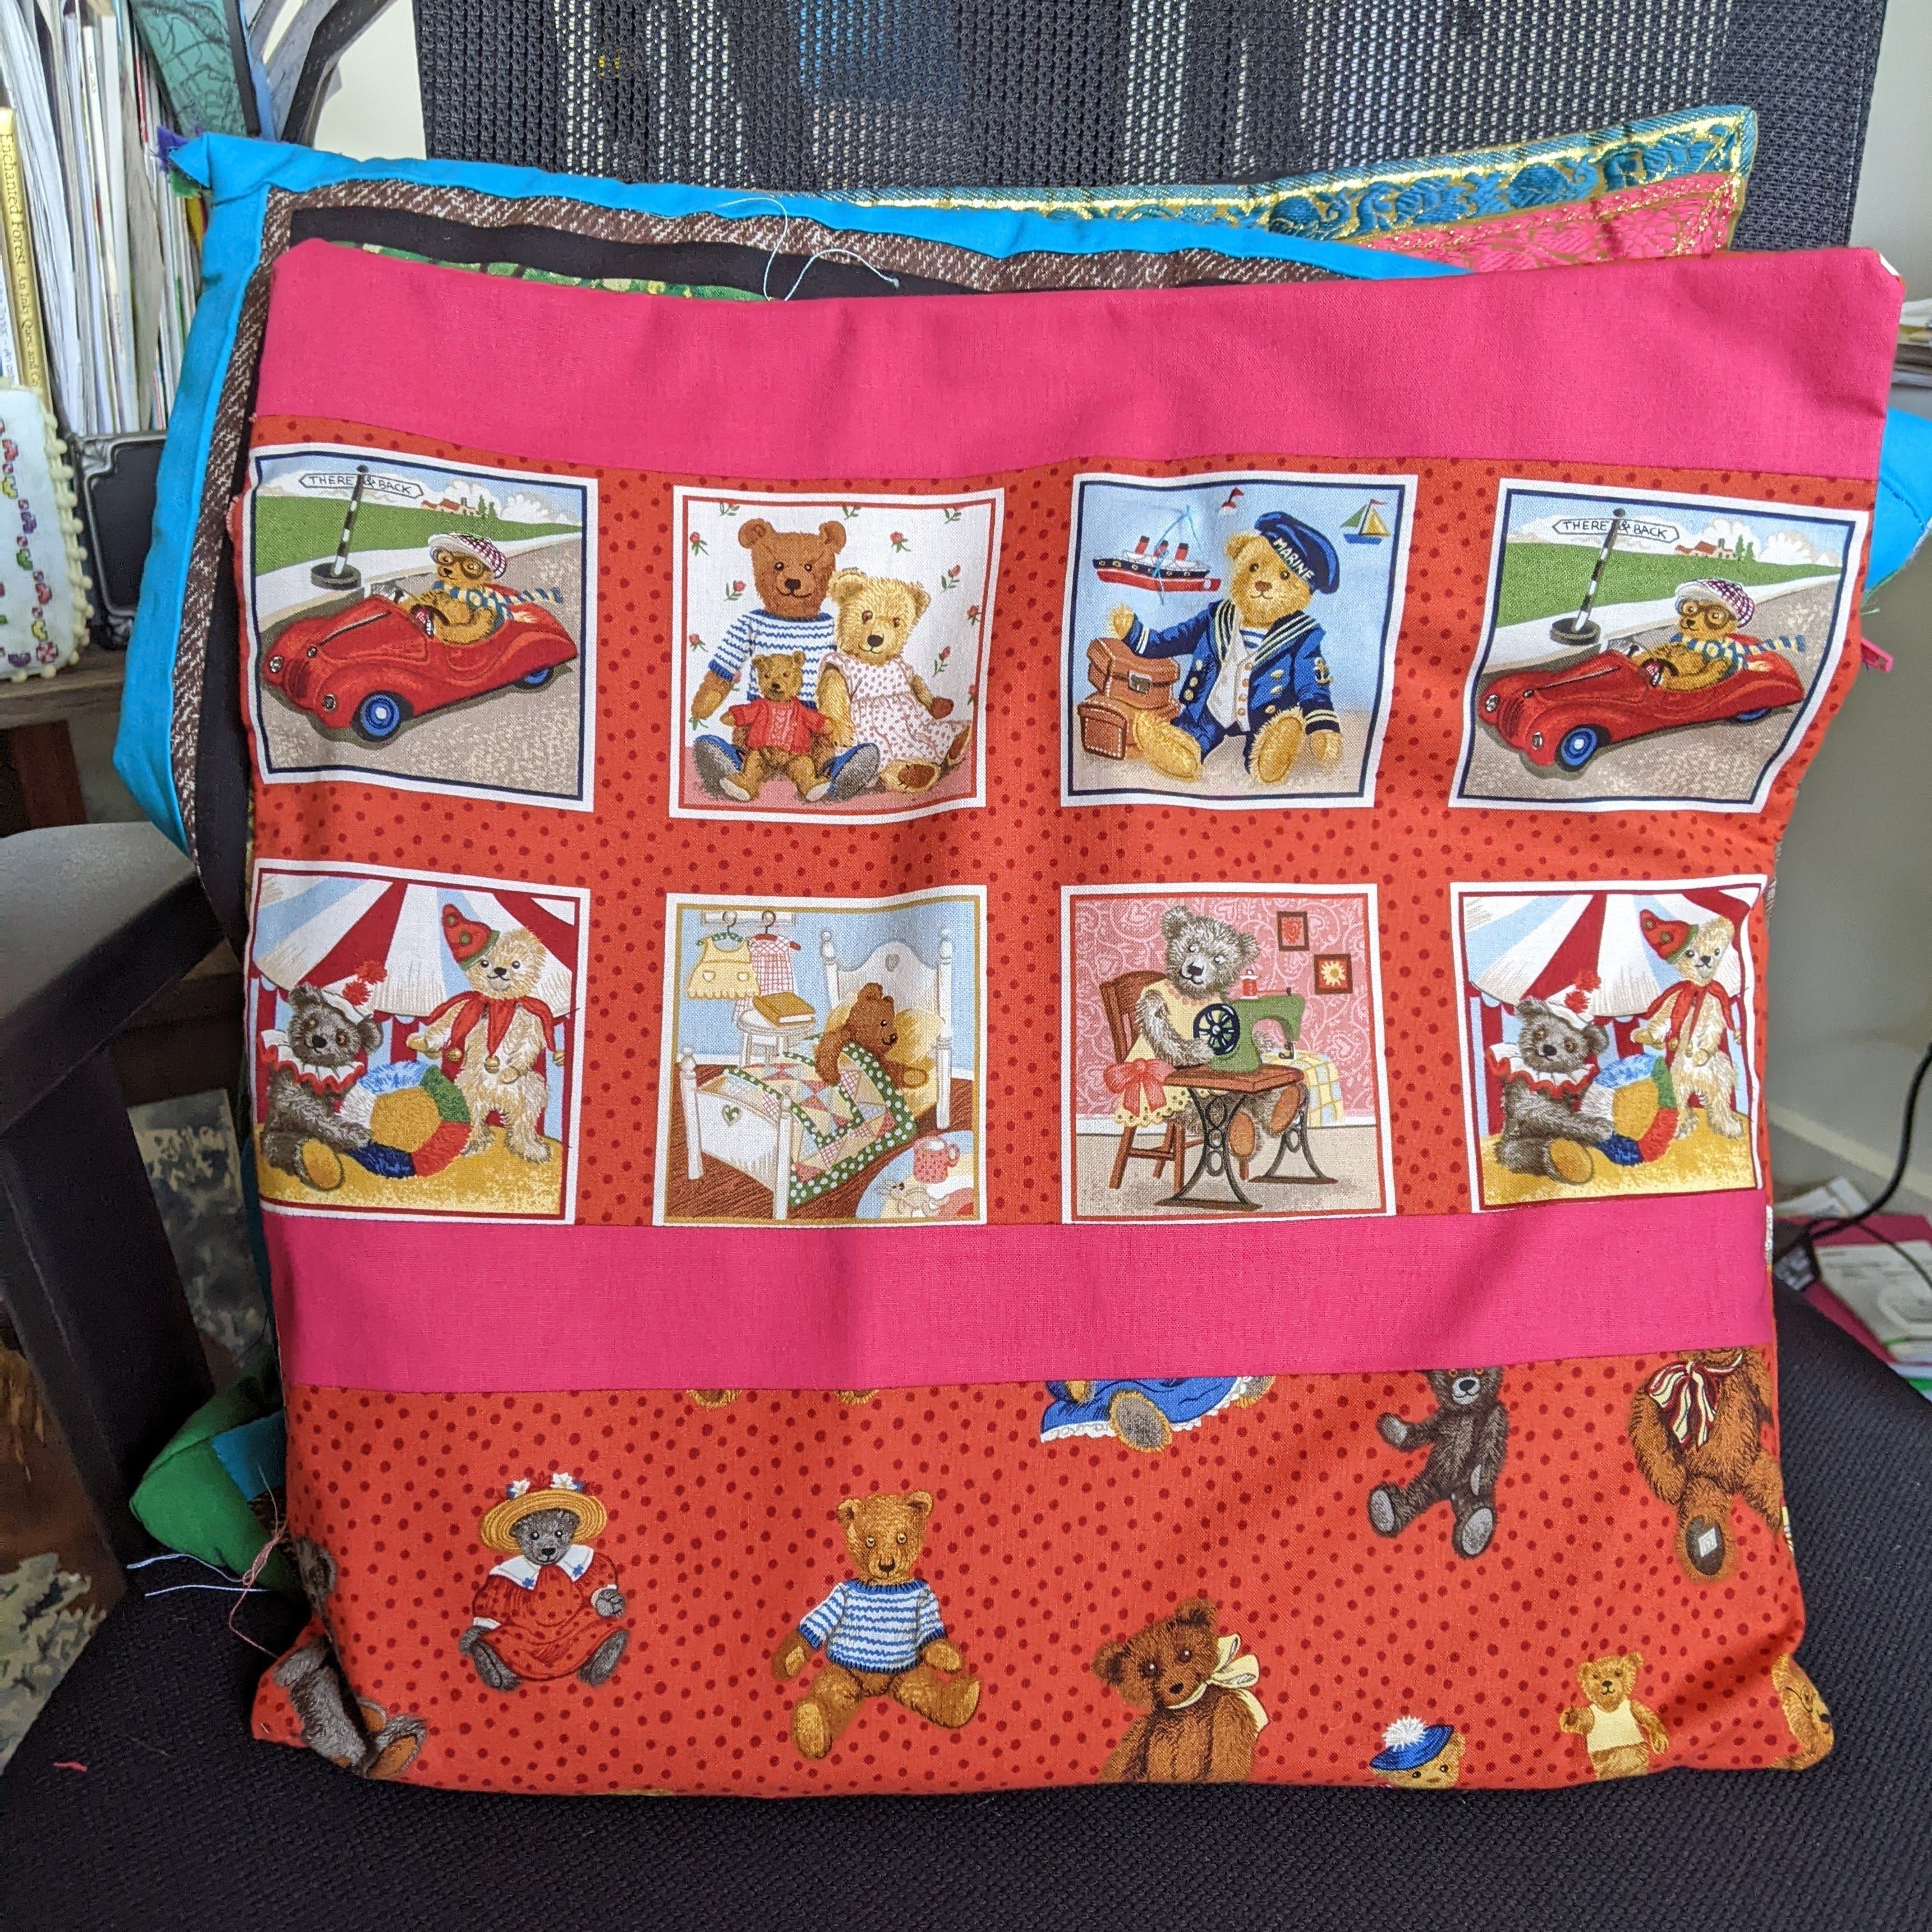 Down the creative rabbit hole of making project bags for cross stitch. –  The XStitching Runner